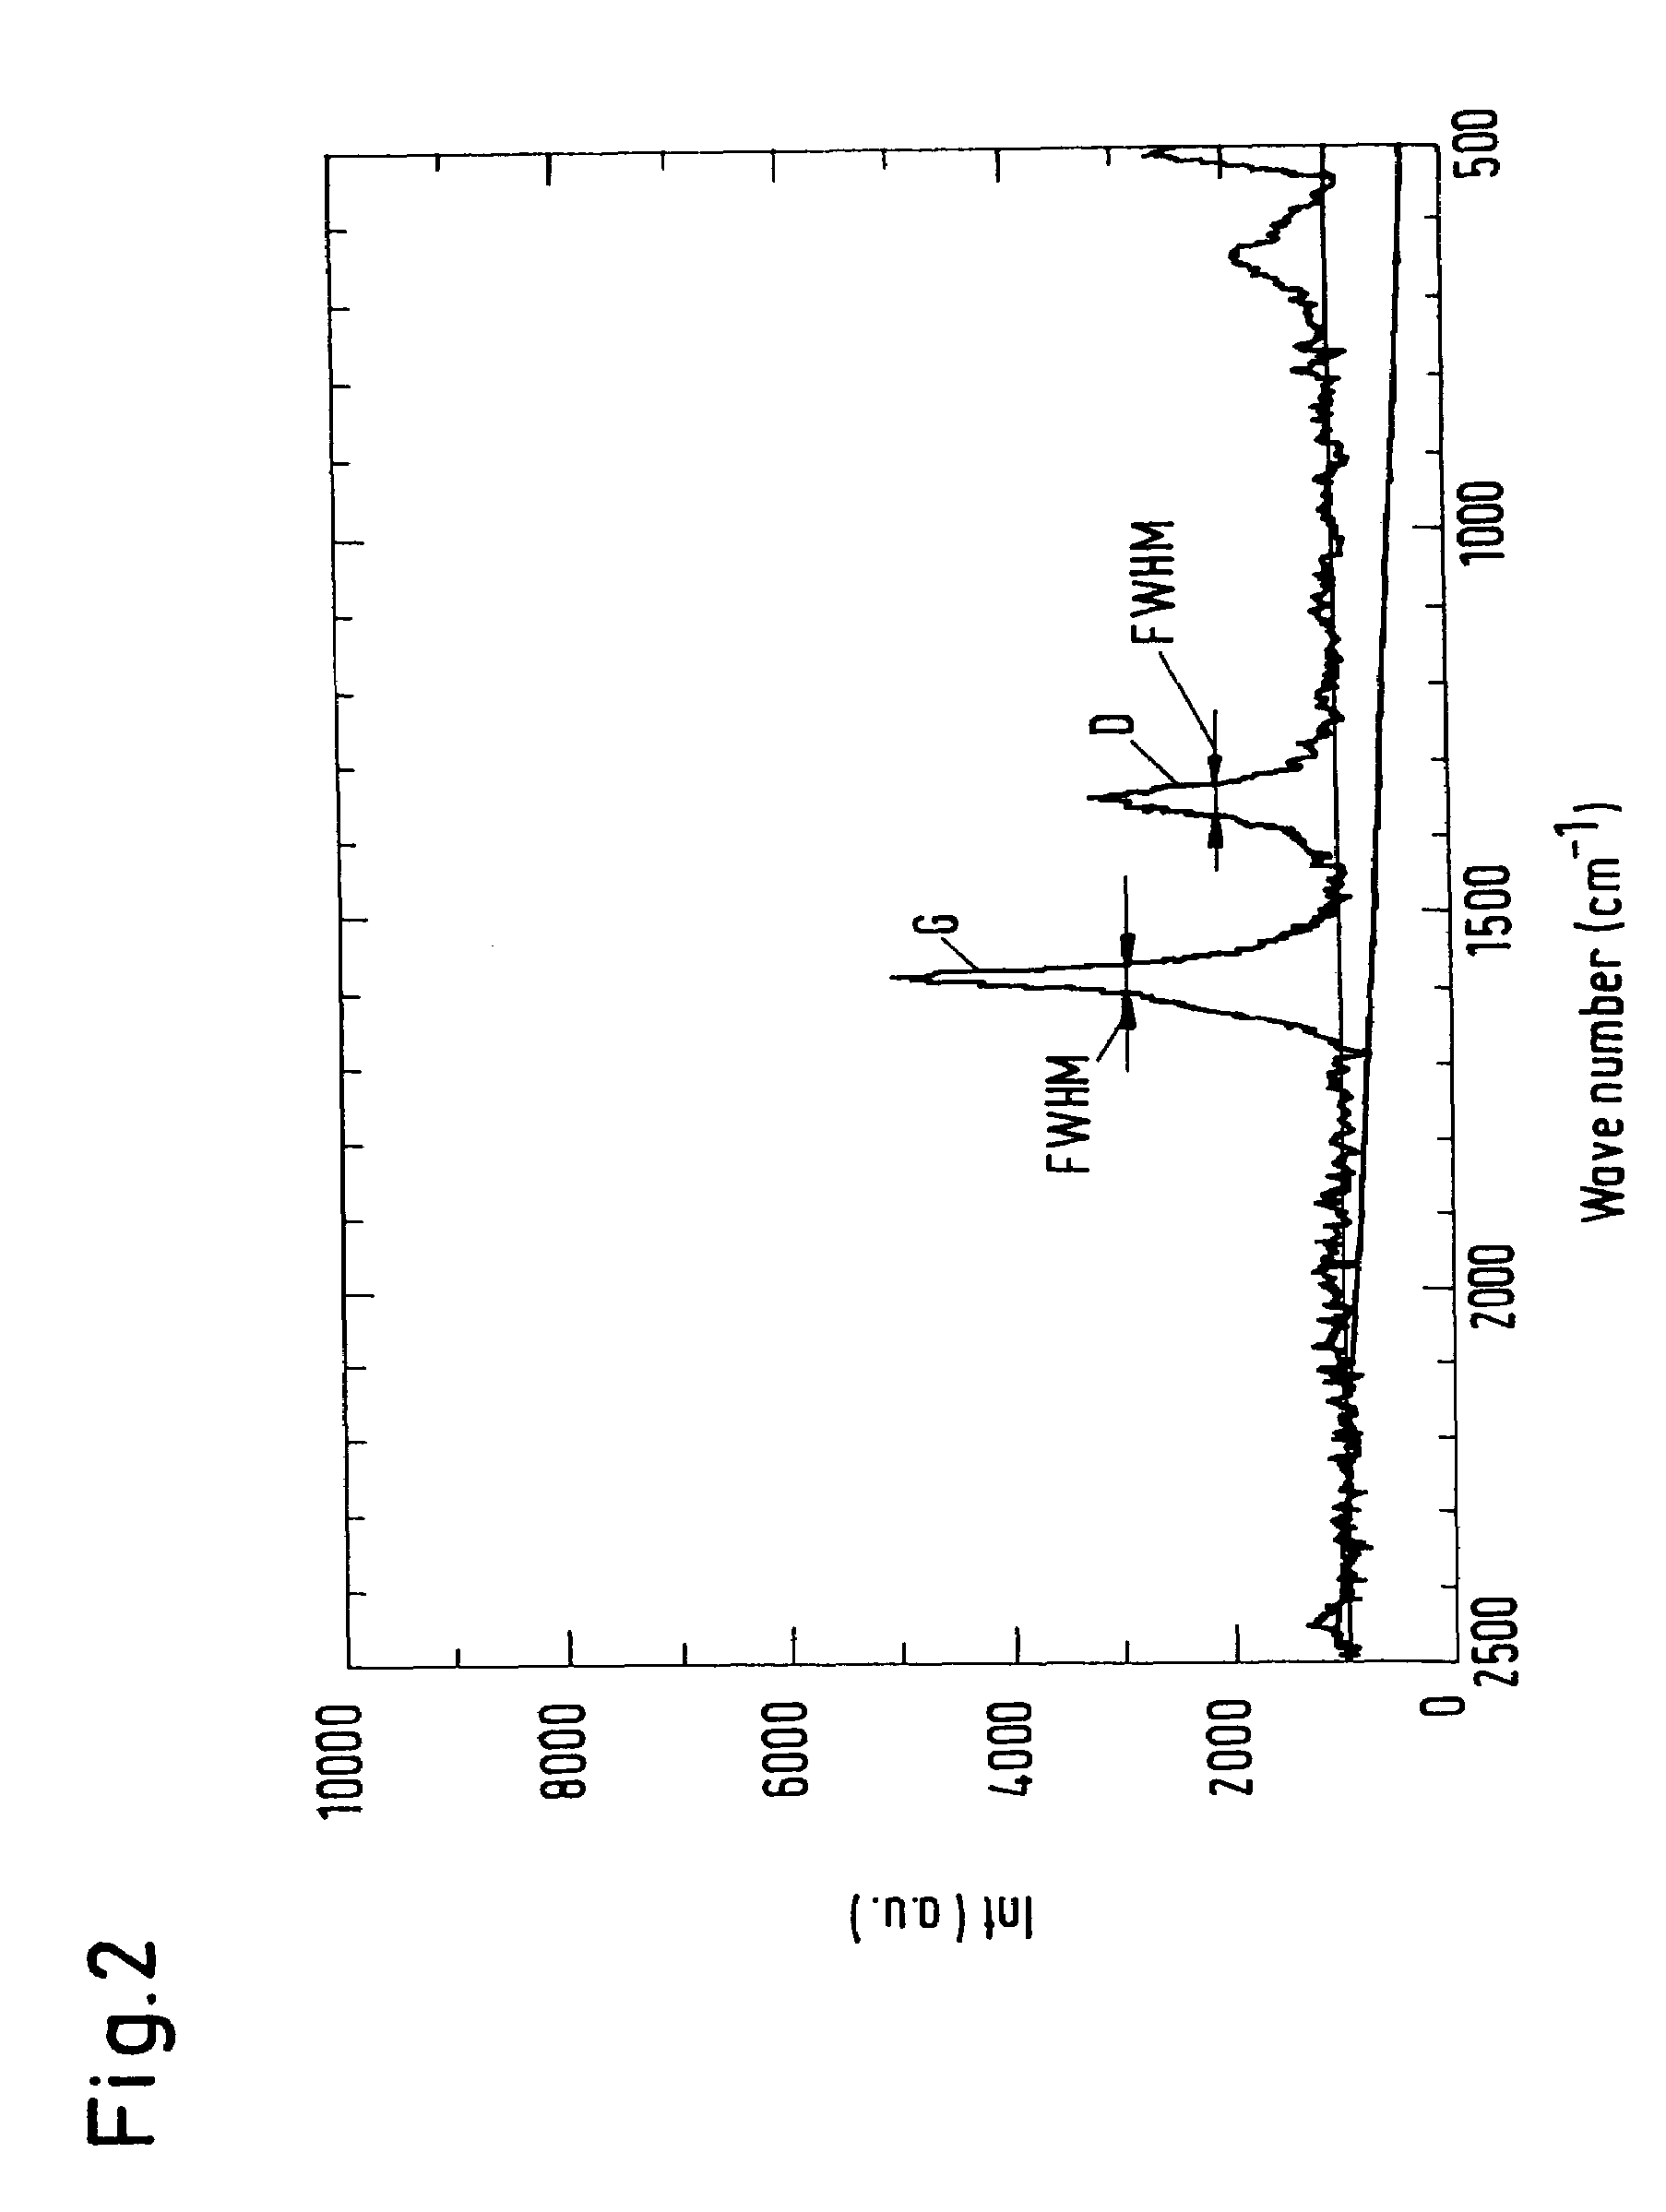 Carbon-containing hard coating and a method for depositing a hard coating onto a substrate